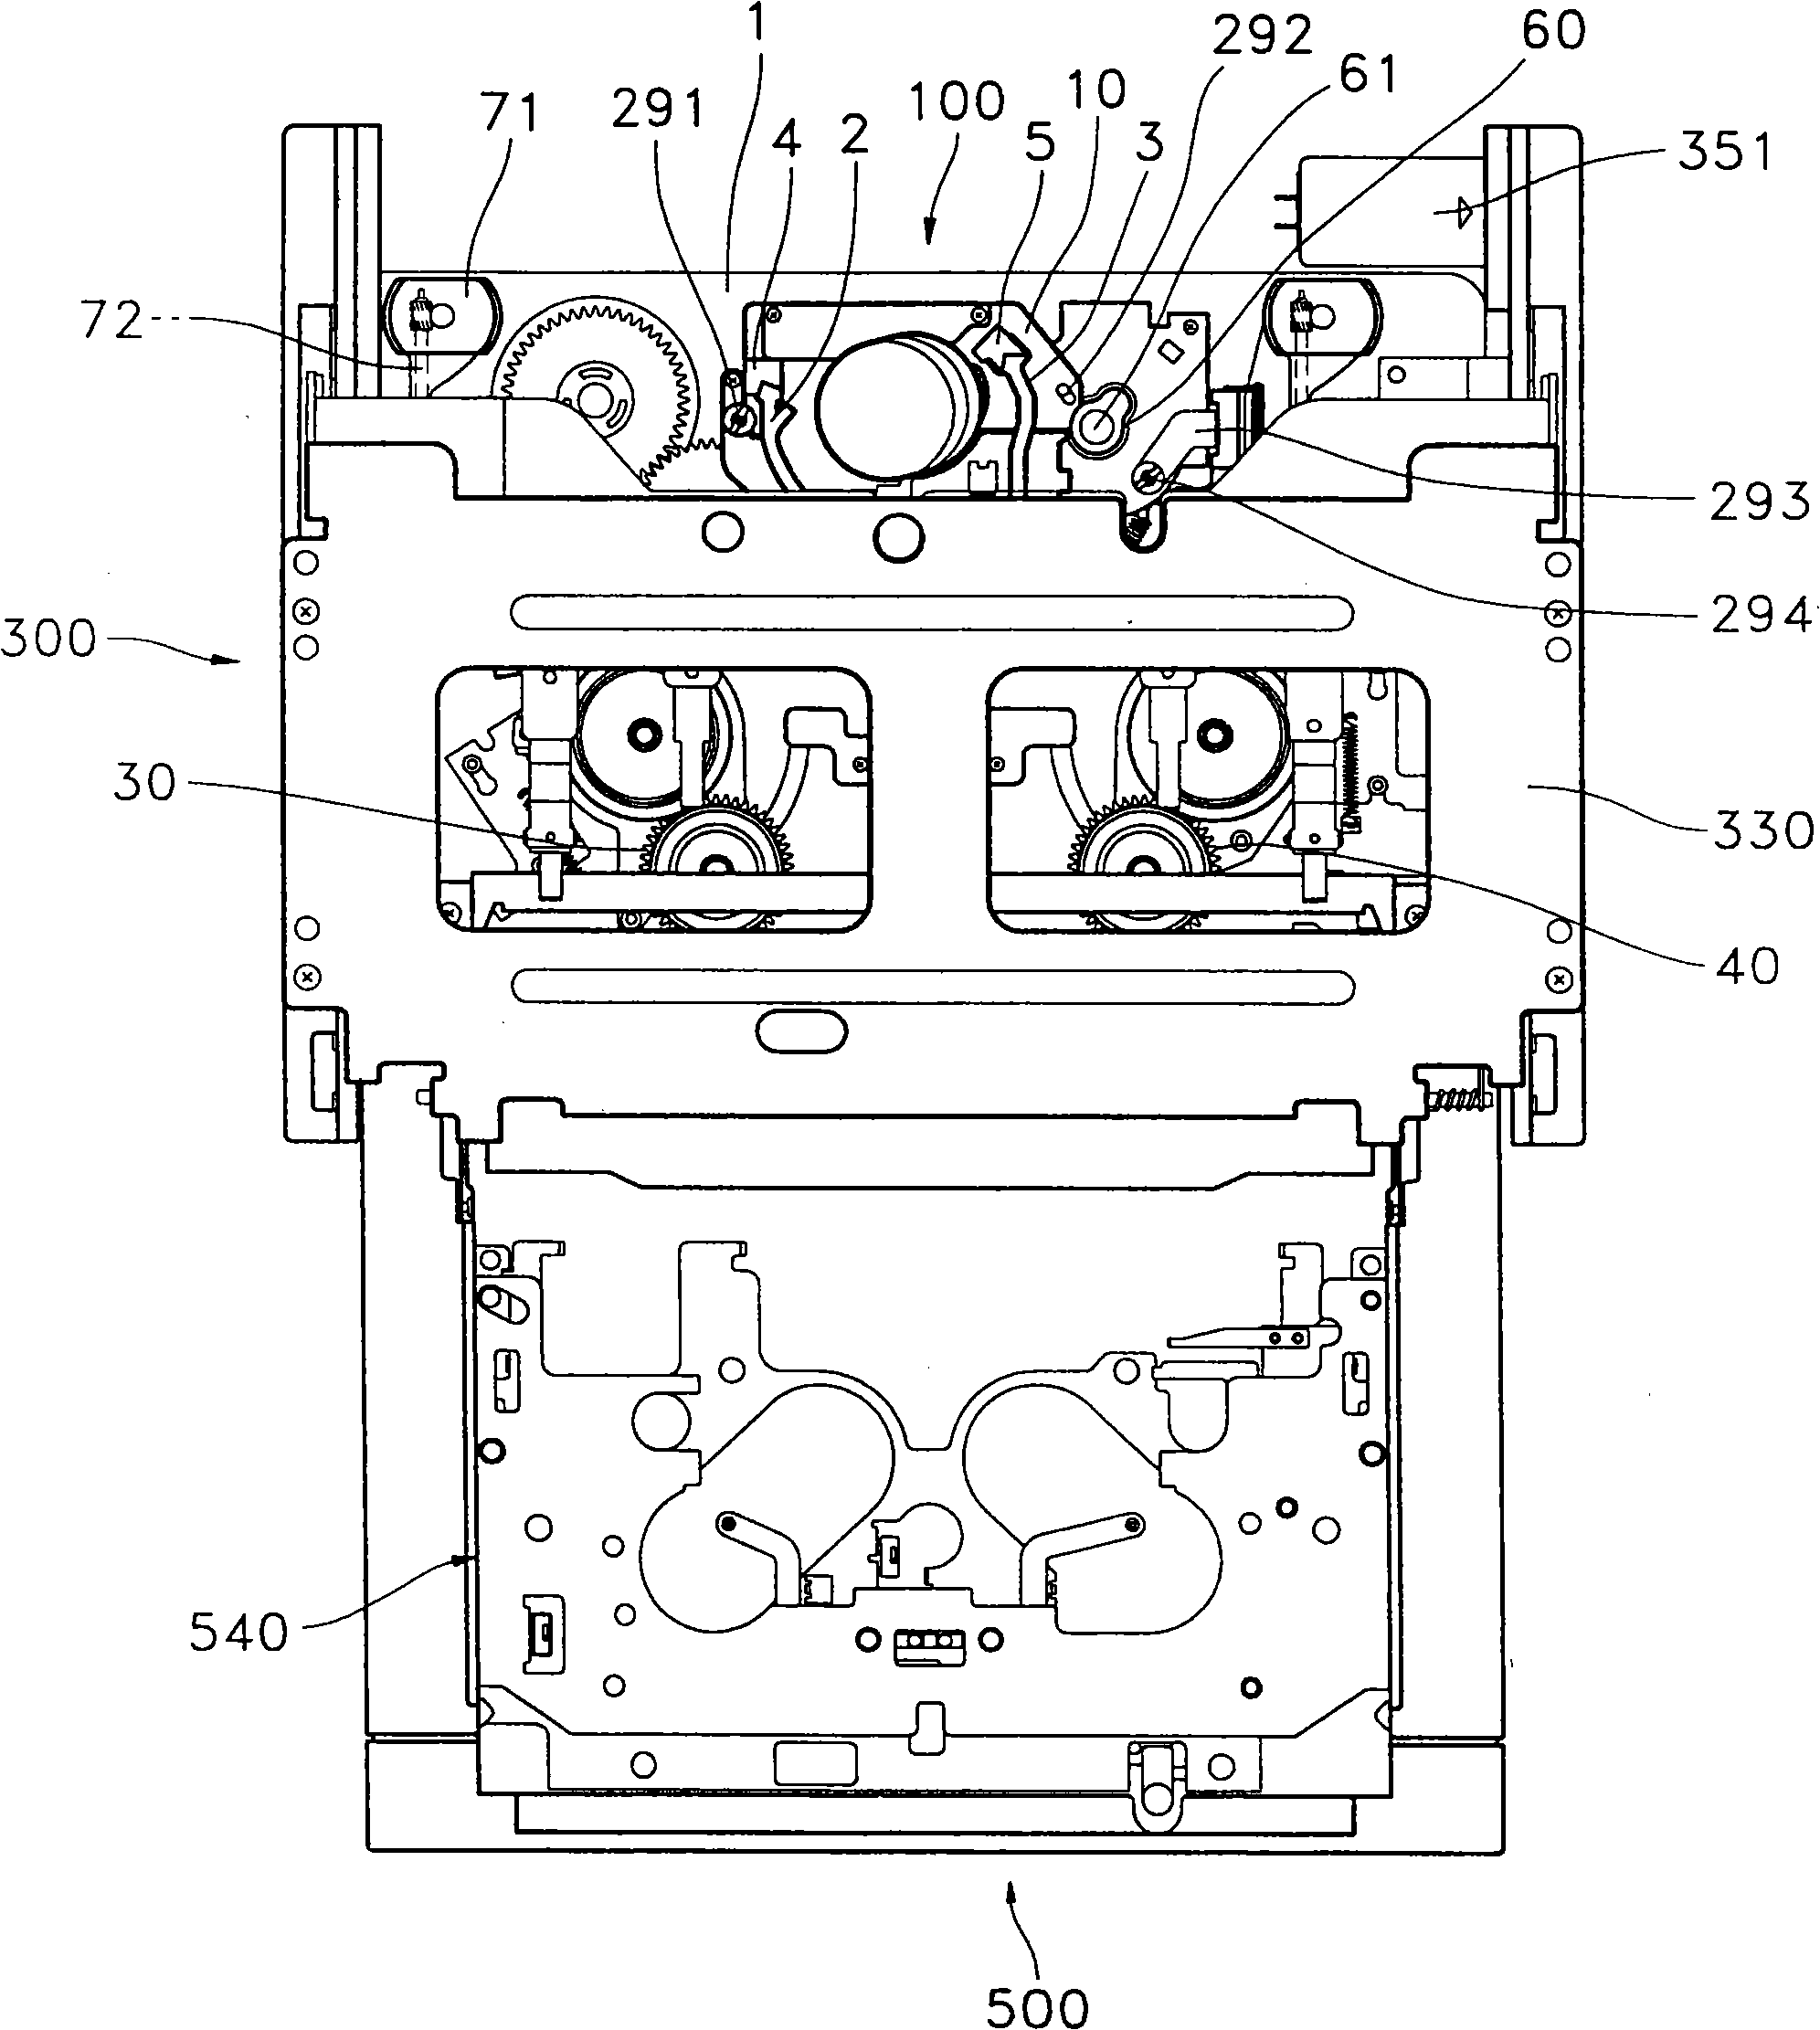 Tray loading type magnetic recording and reproducing apparatus